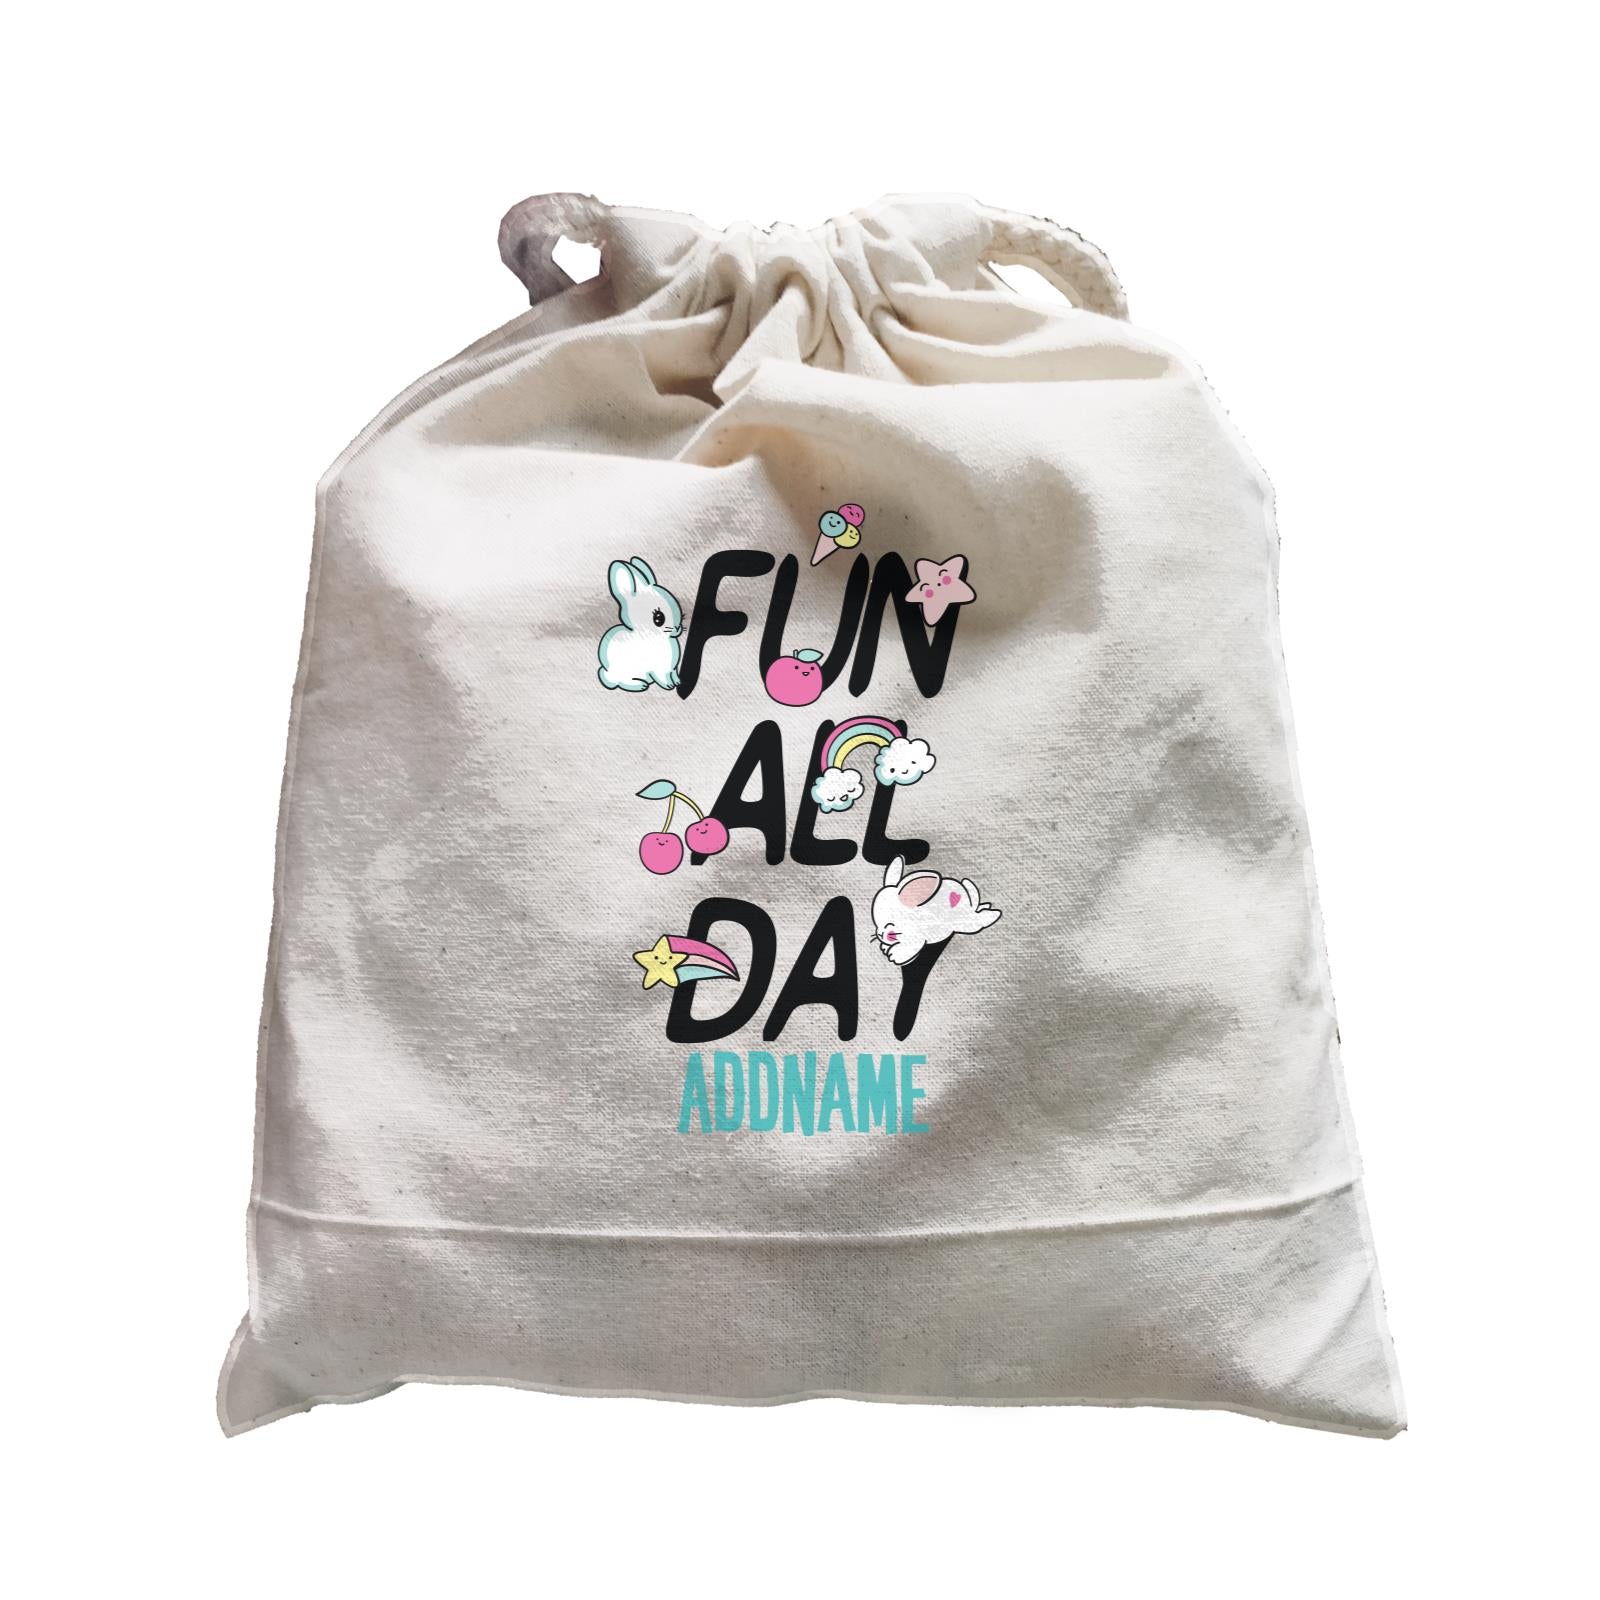 Cool Vibrant Series Fun All Day Addname Satchel